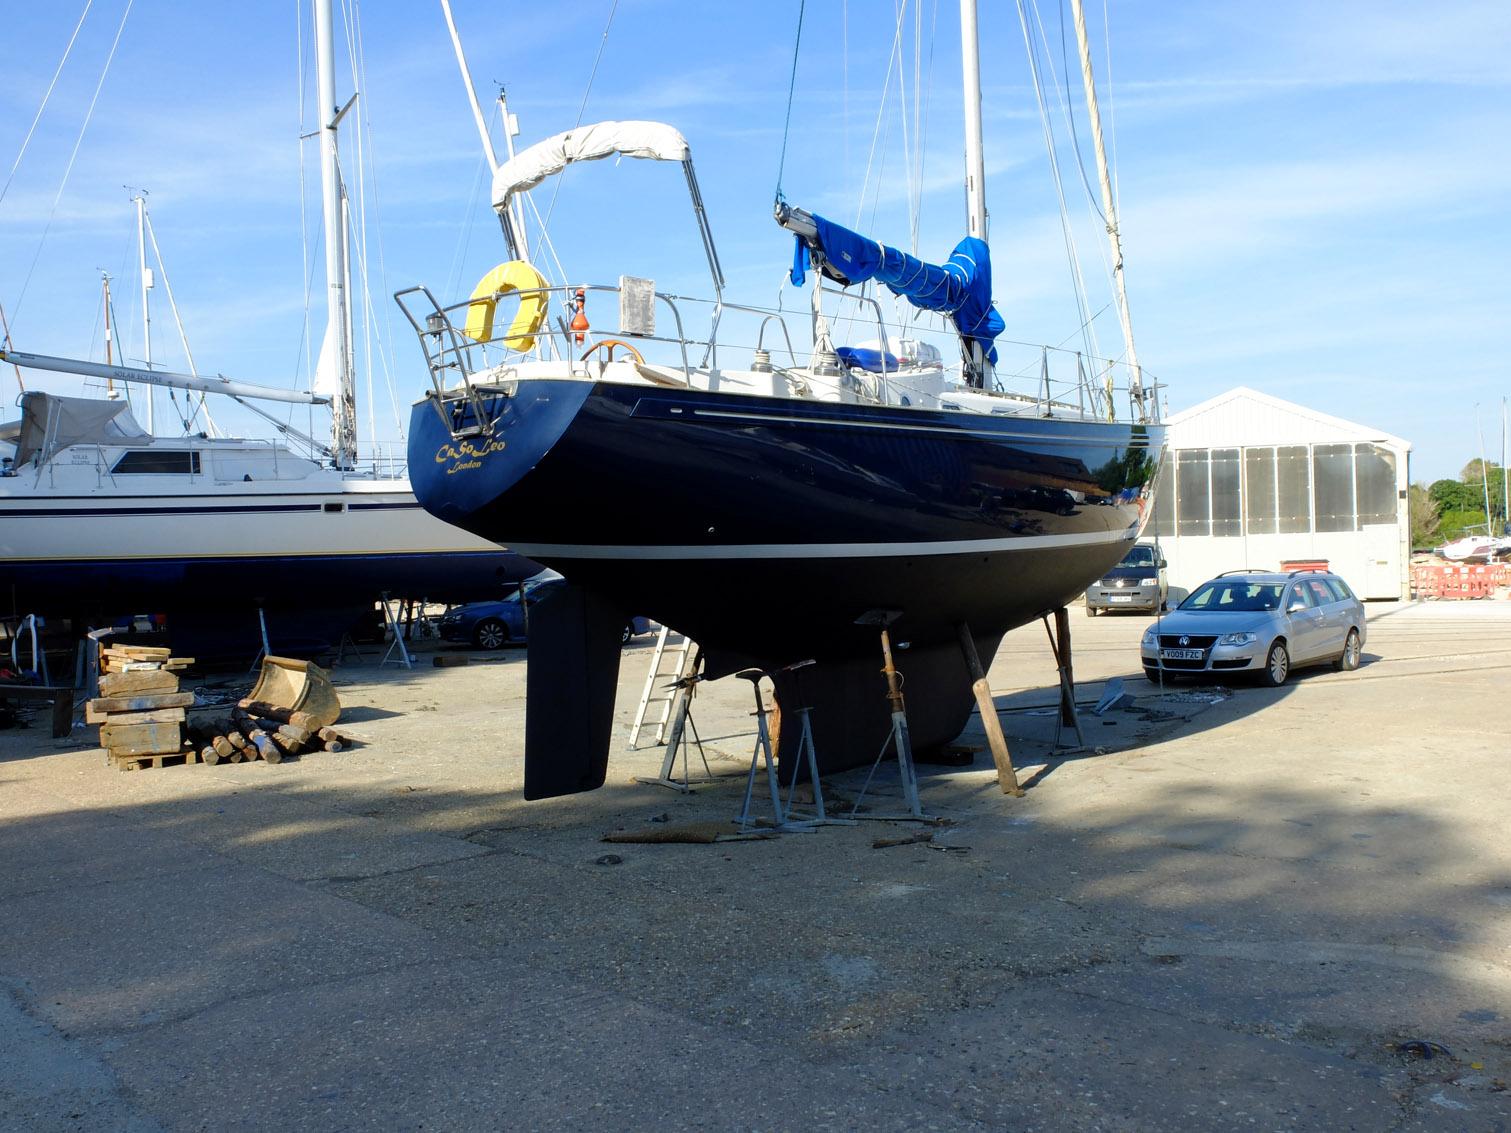 rival yacht for sale uk